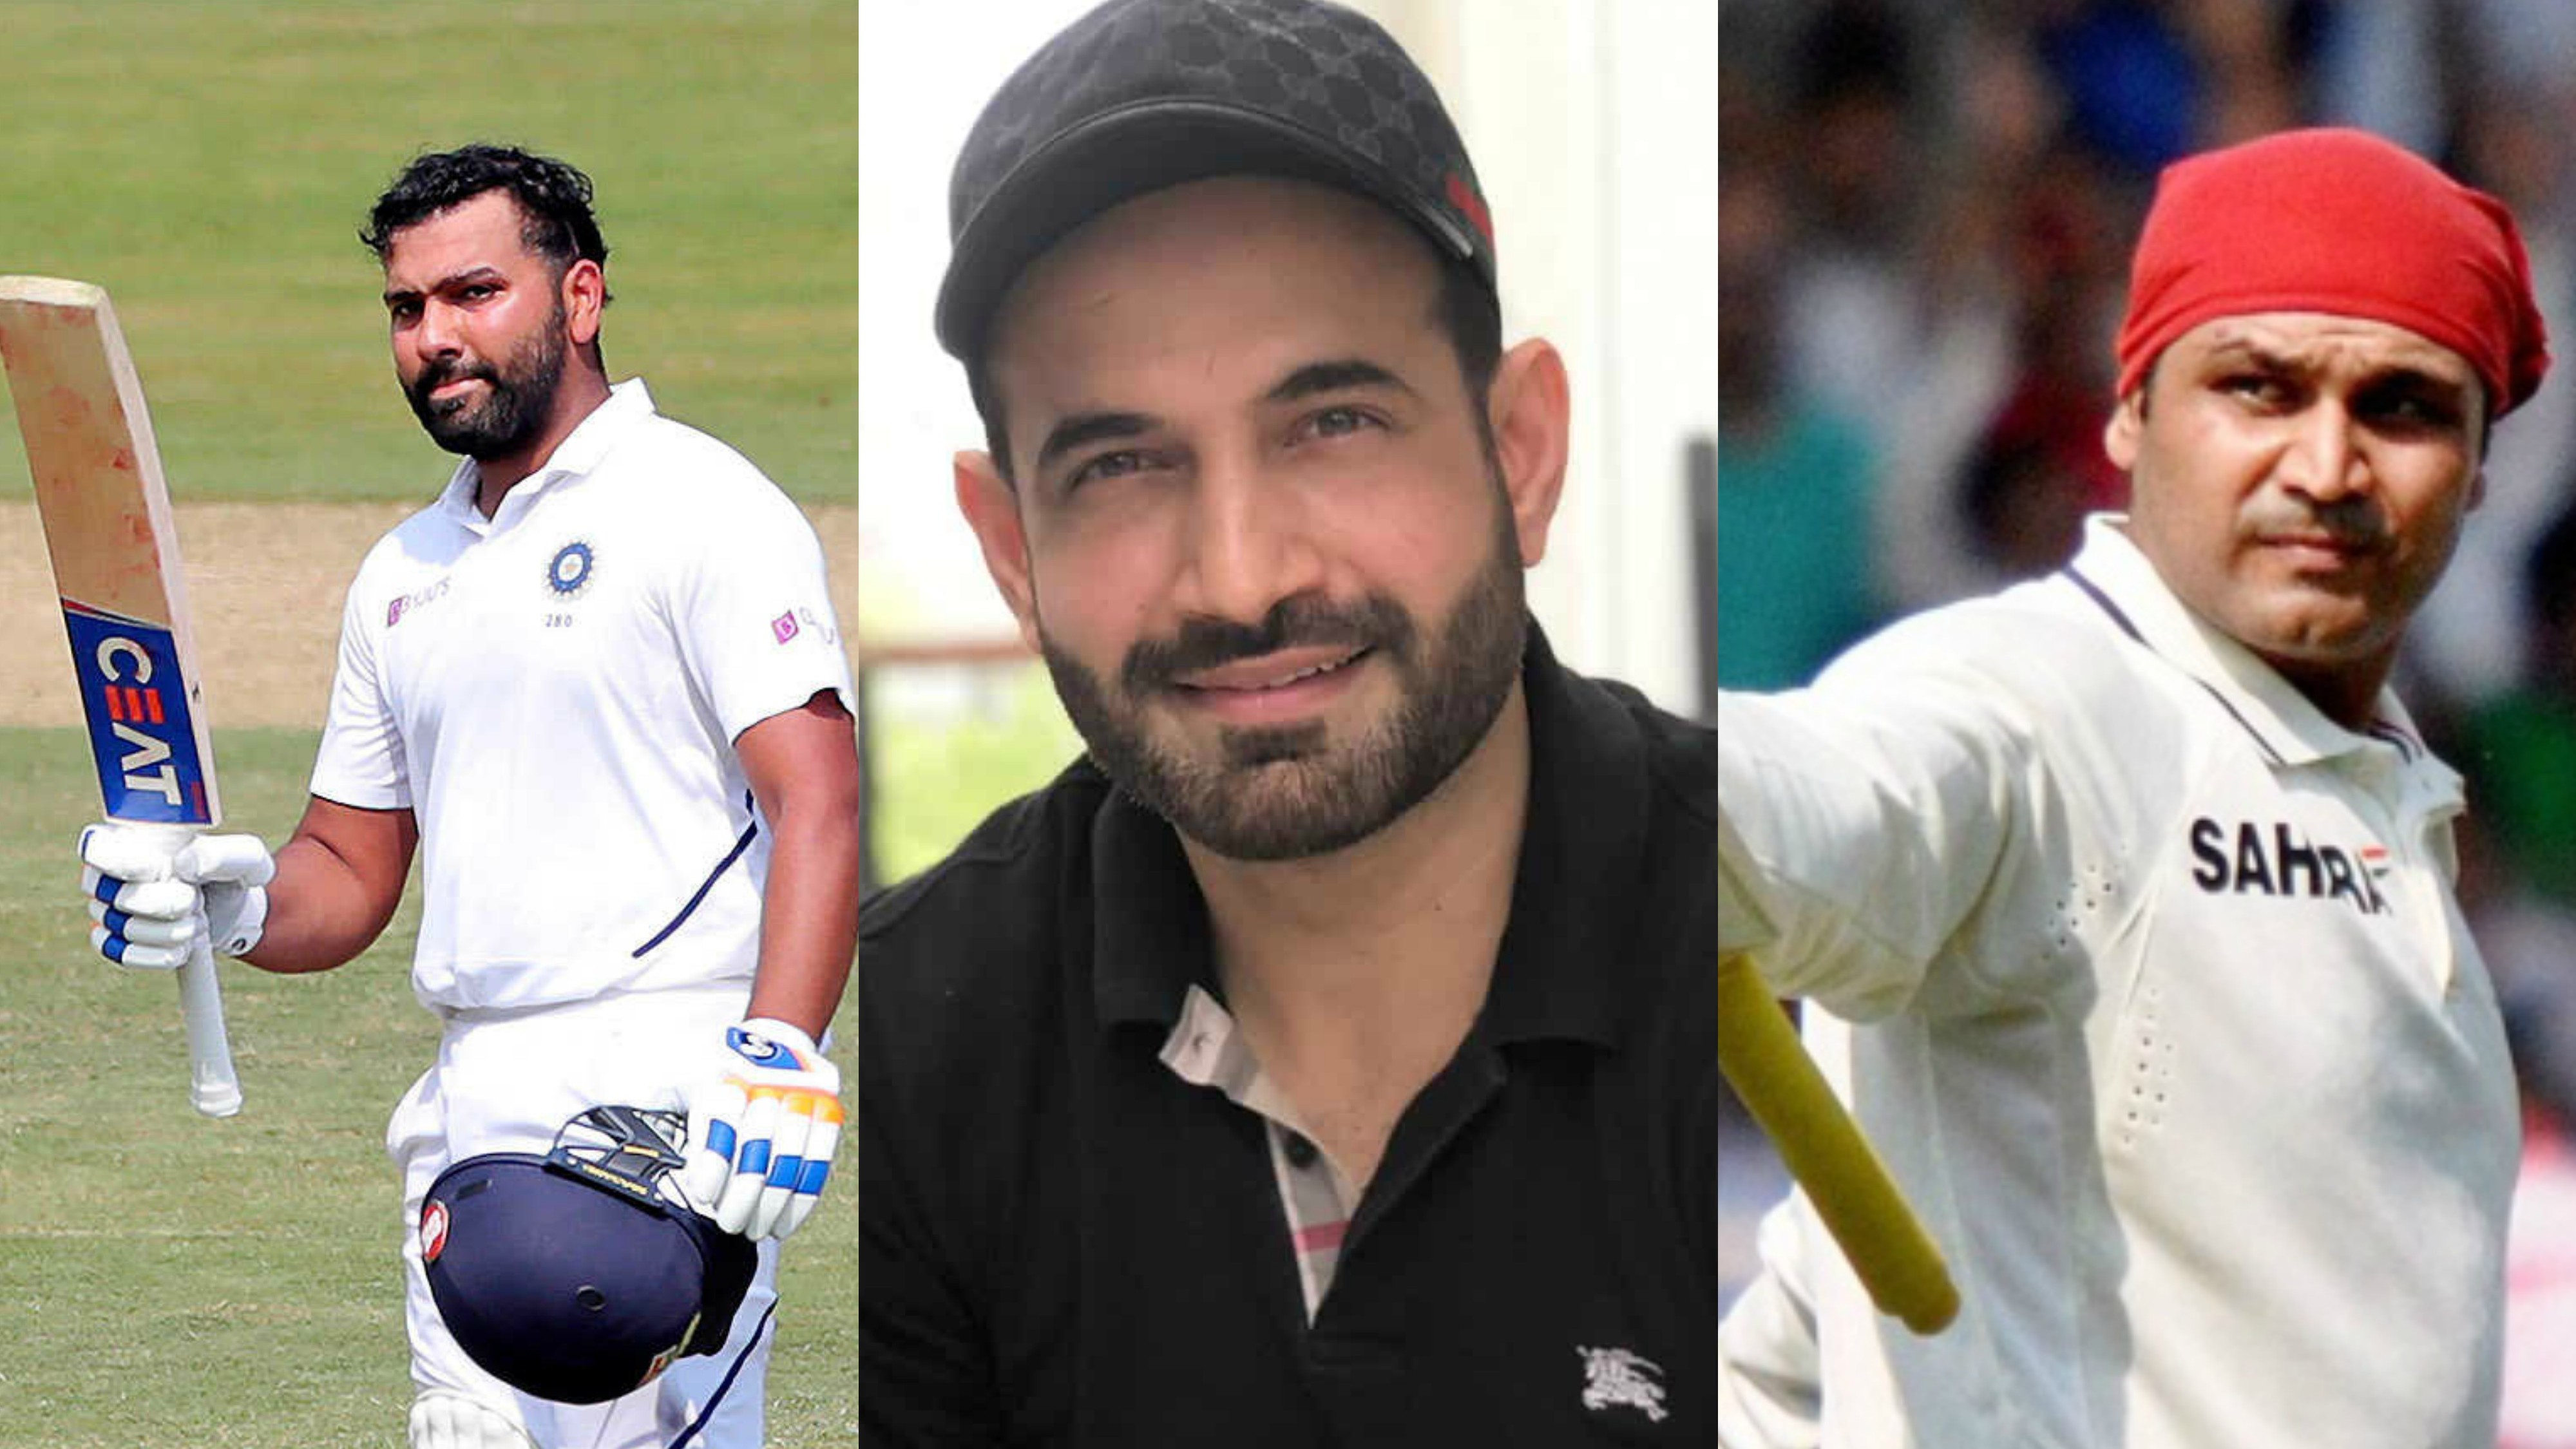 Rohit Sharma can have a similar impact like Virender Sehwag in Test cricket, says Irfan Pathan